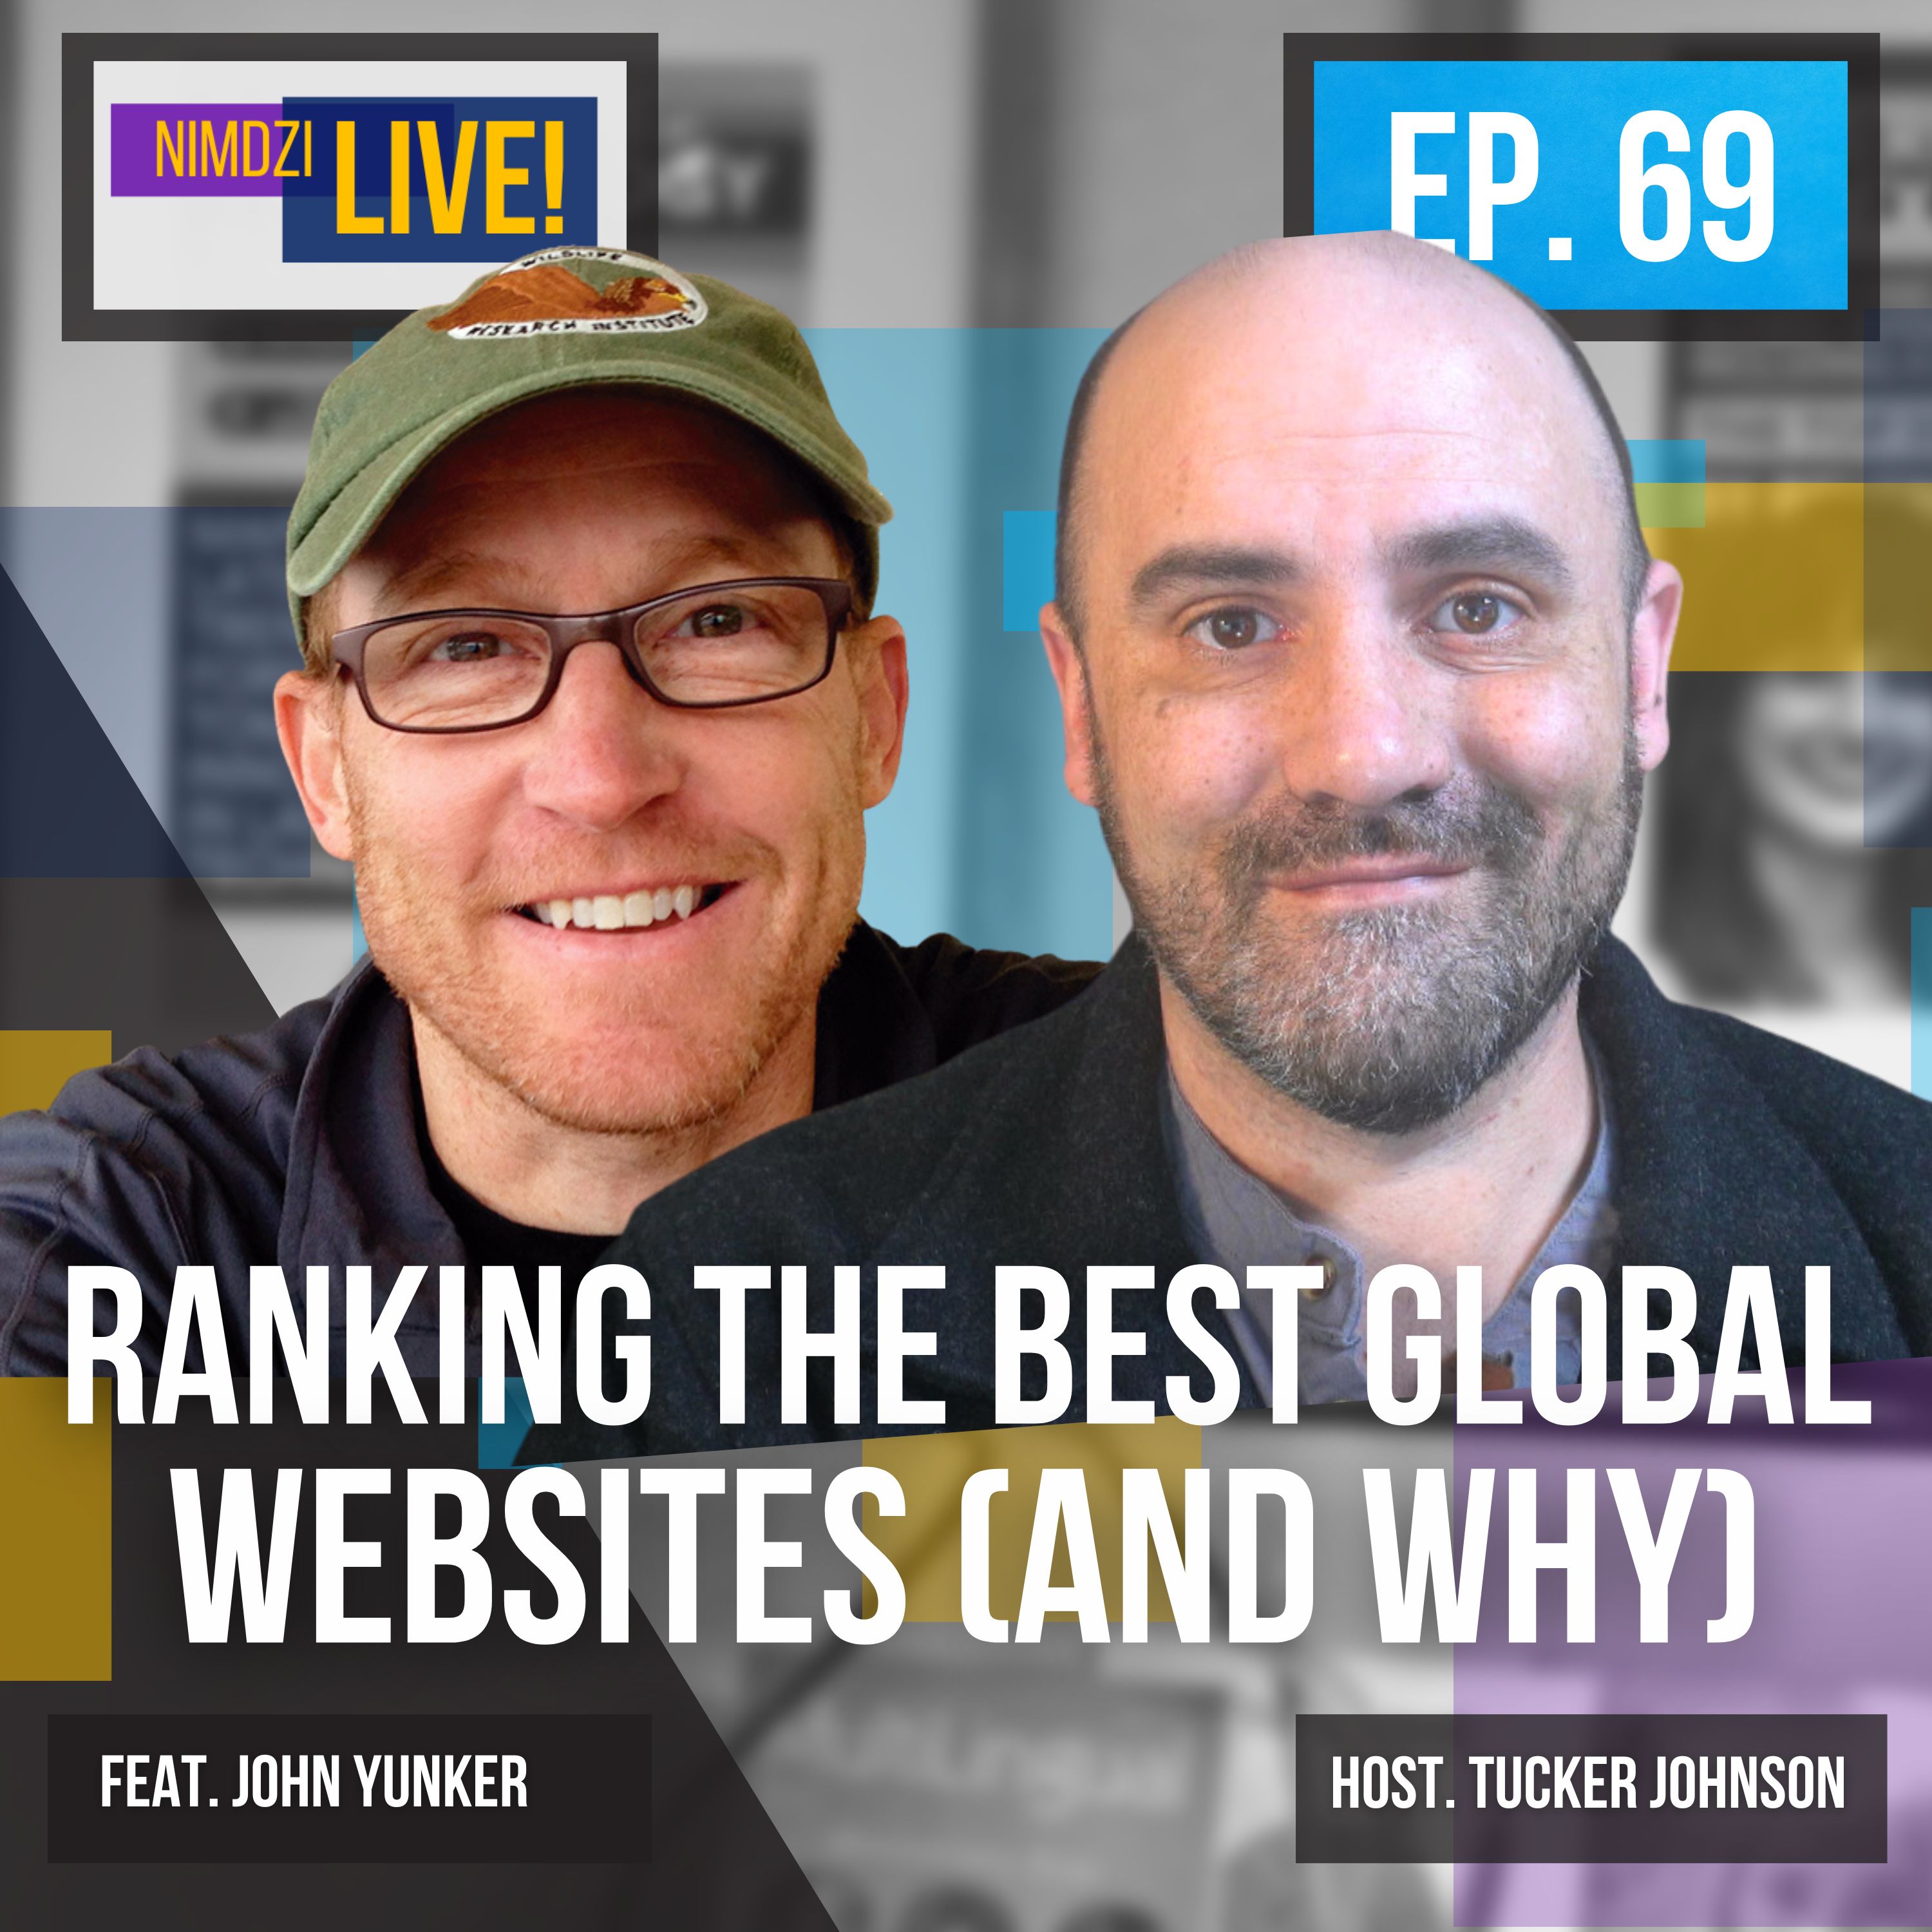 The Best Global Websites (and why) feat. John Yunker